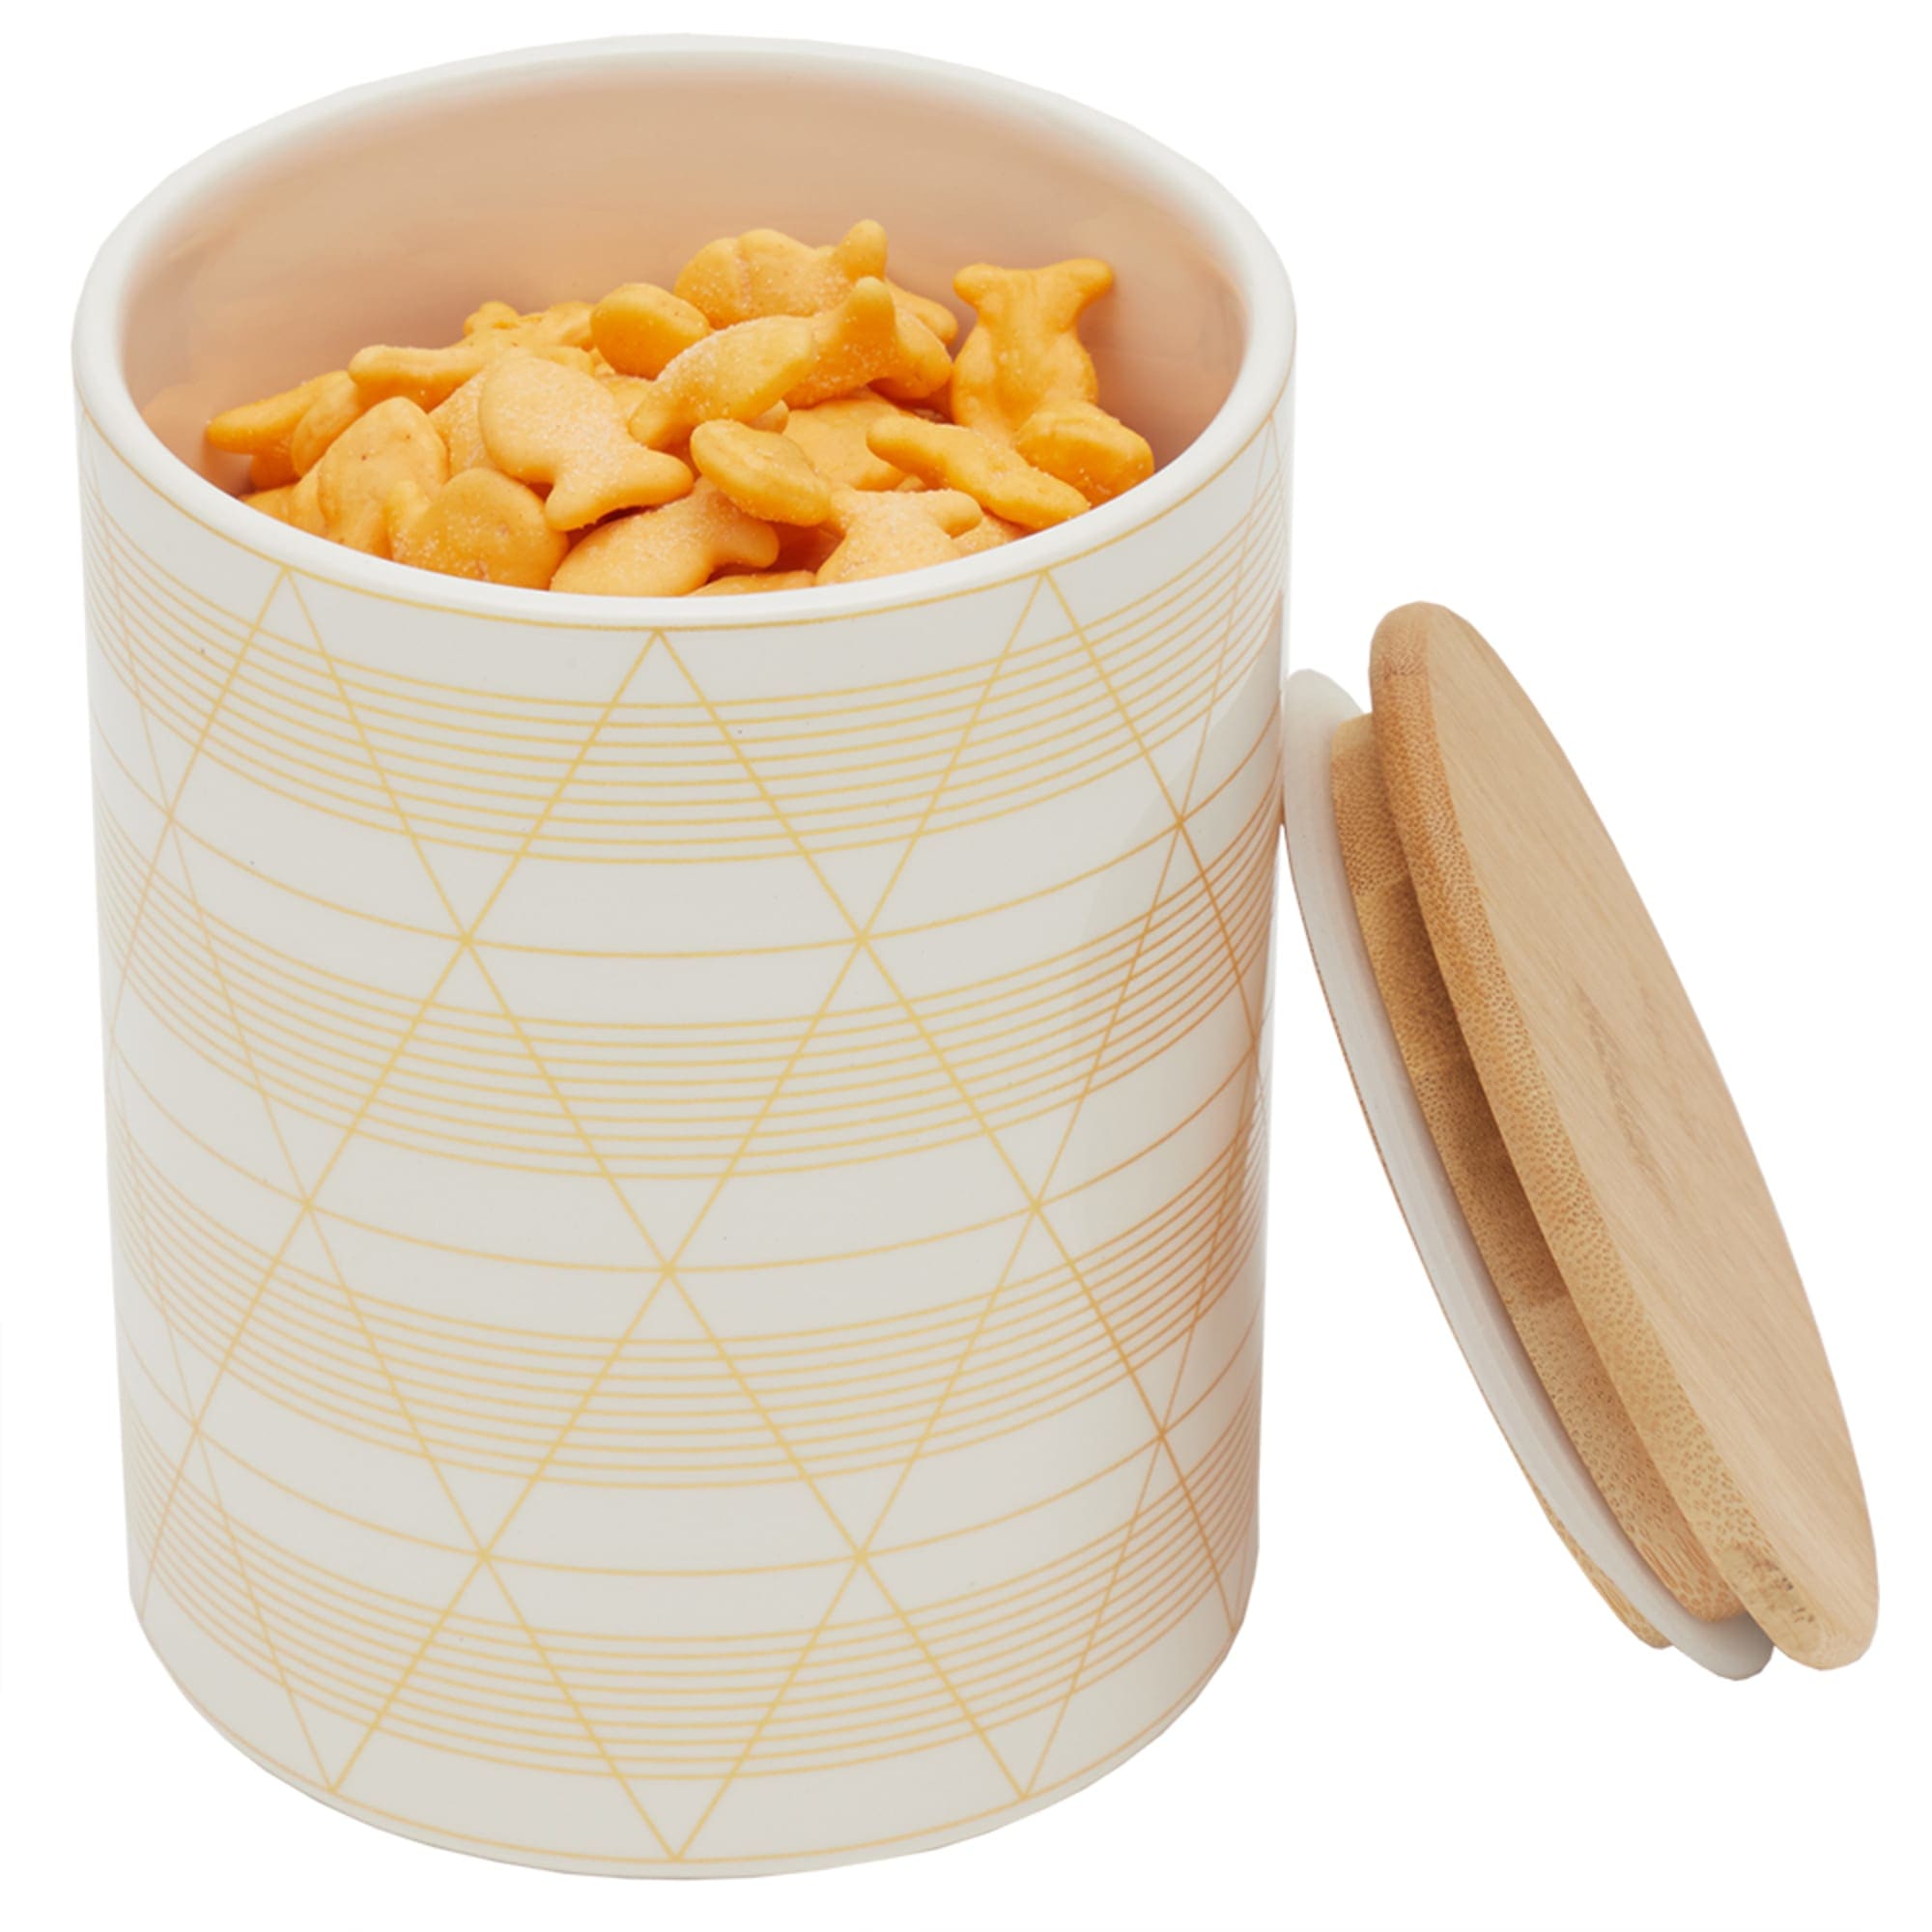 Home Basics Diamond Stripe Medium Ceramic Canister with Bamboo Top $6.00 EACH, CASE PACK OF 12